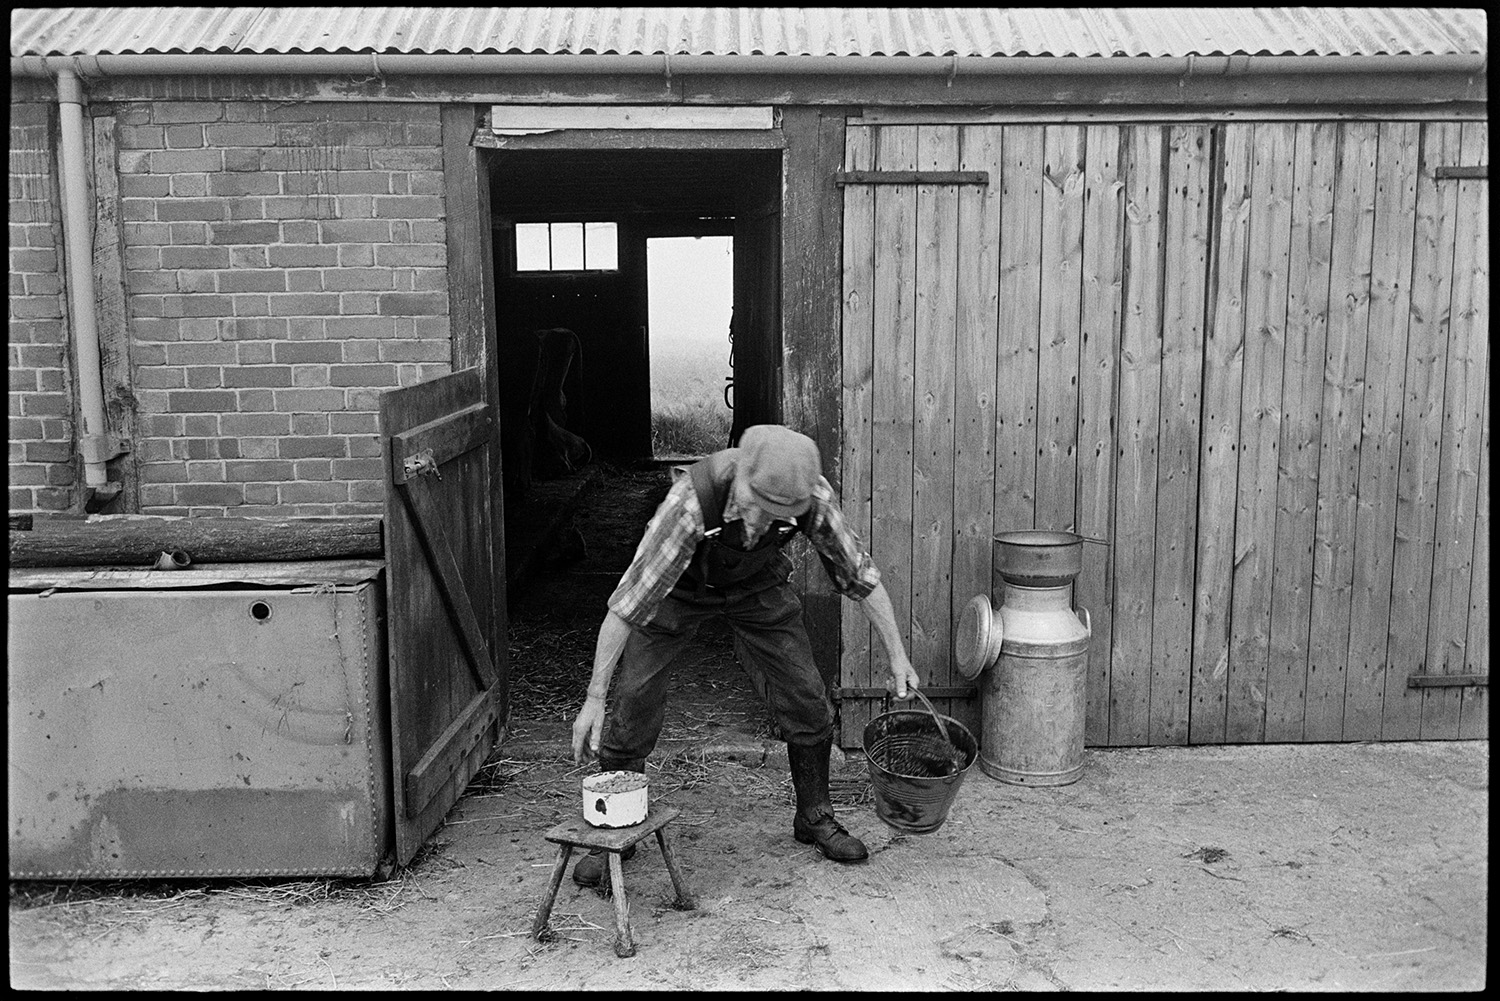 Farmer bringing in cows to be milked and clearing shed. 
[Gordon Sanders picking up a milking stool and a bucket outside a farm buildings at Reynards Park, Ashreigney. A milk churn is stood by wooden doors to the building.]